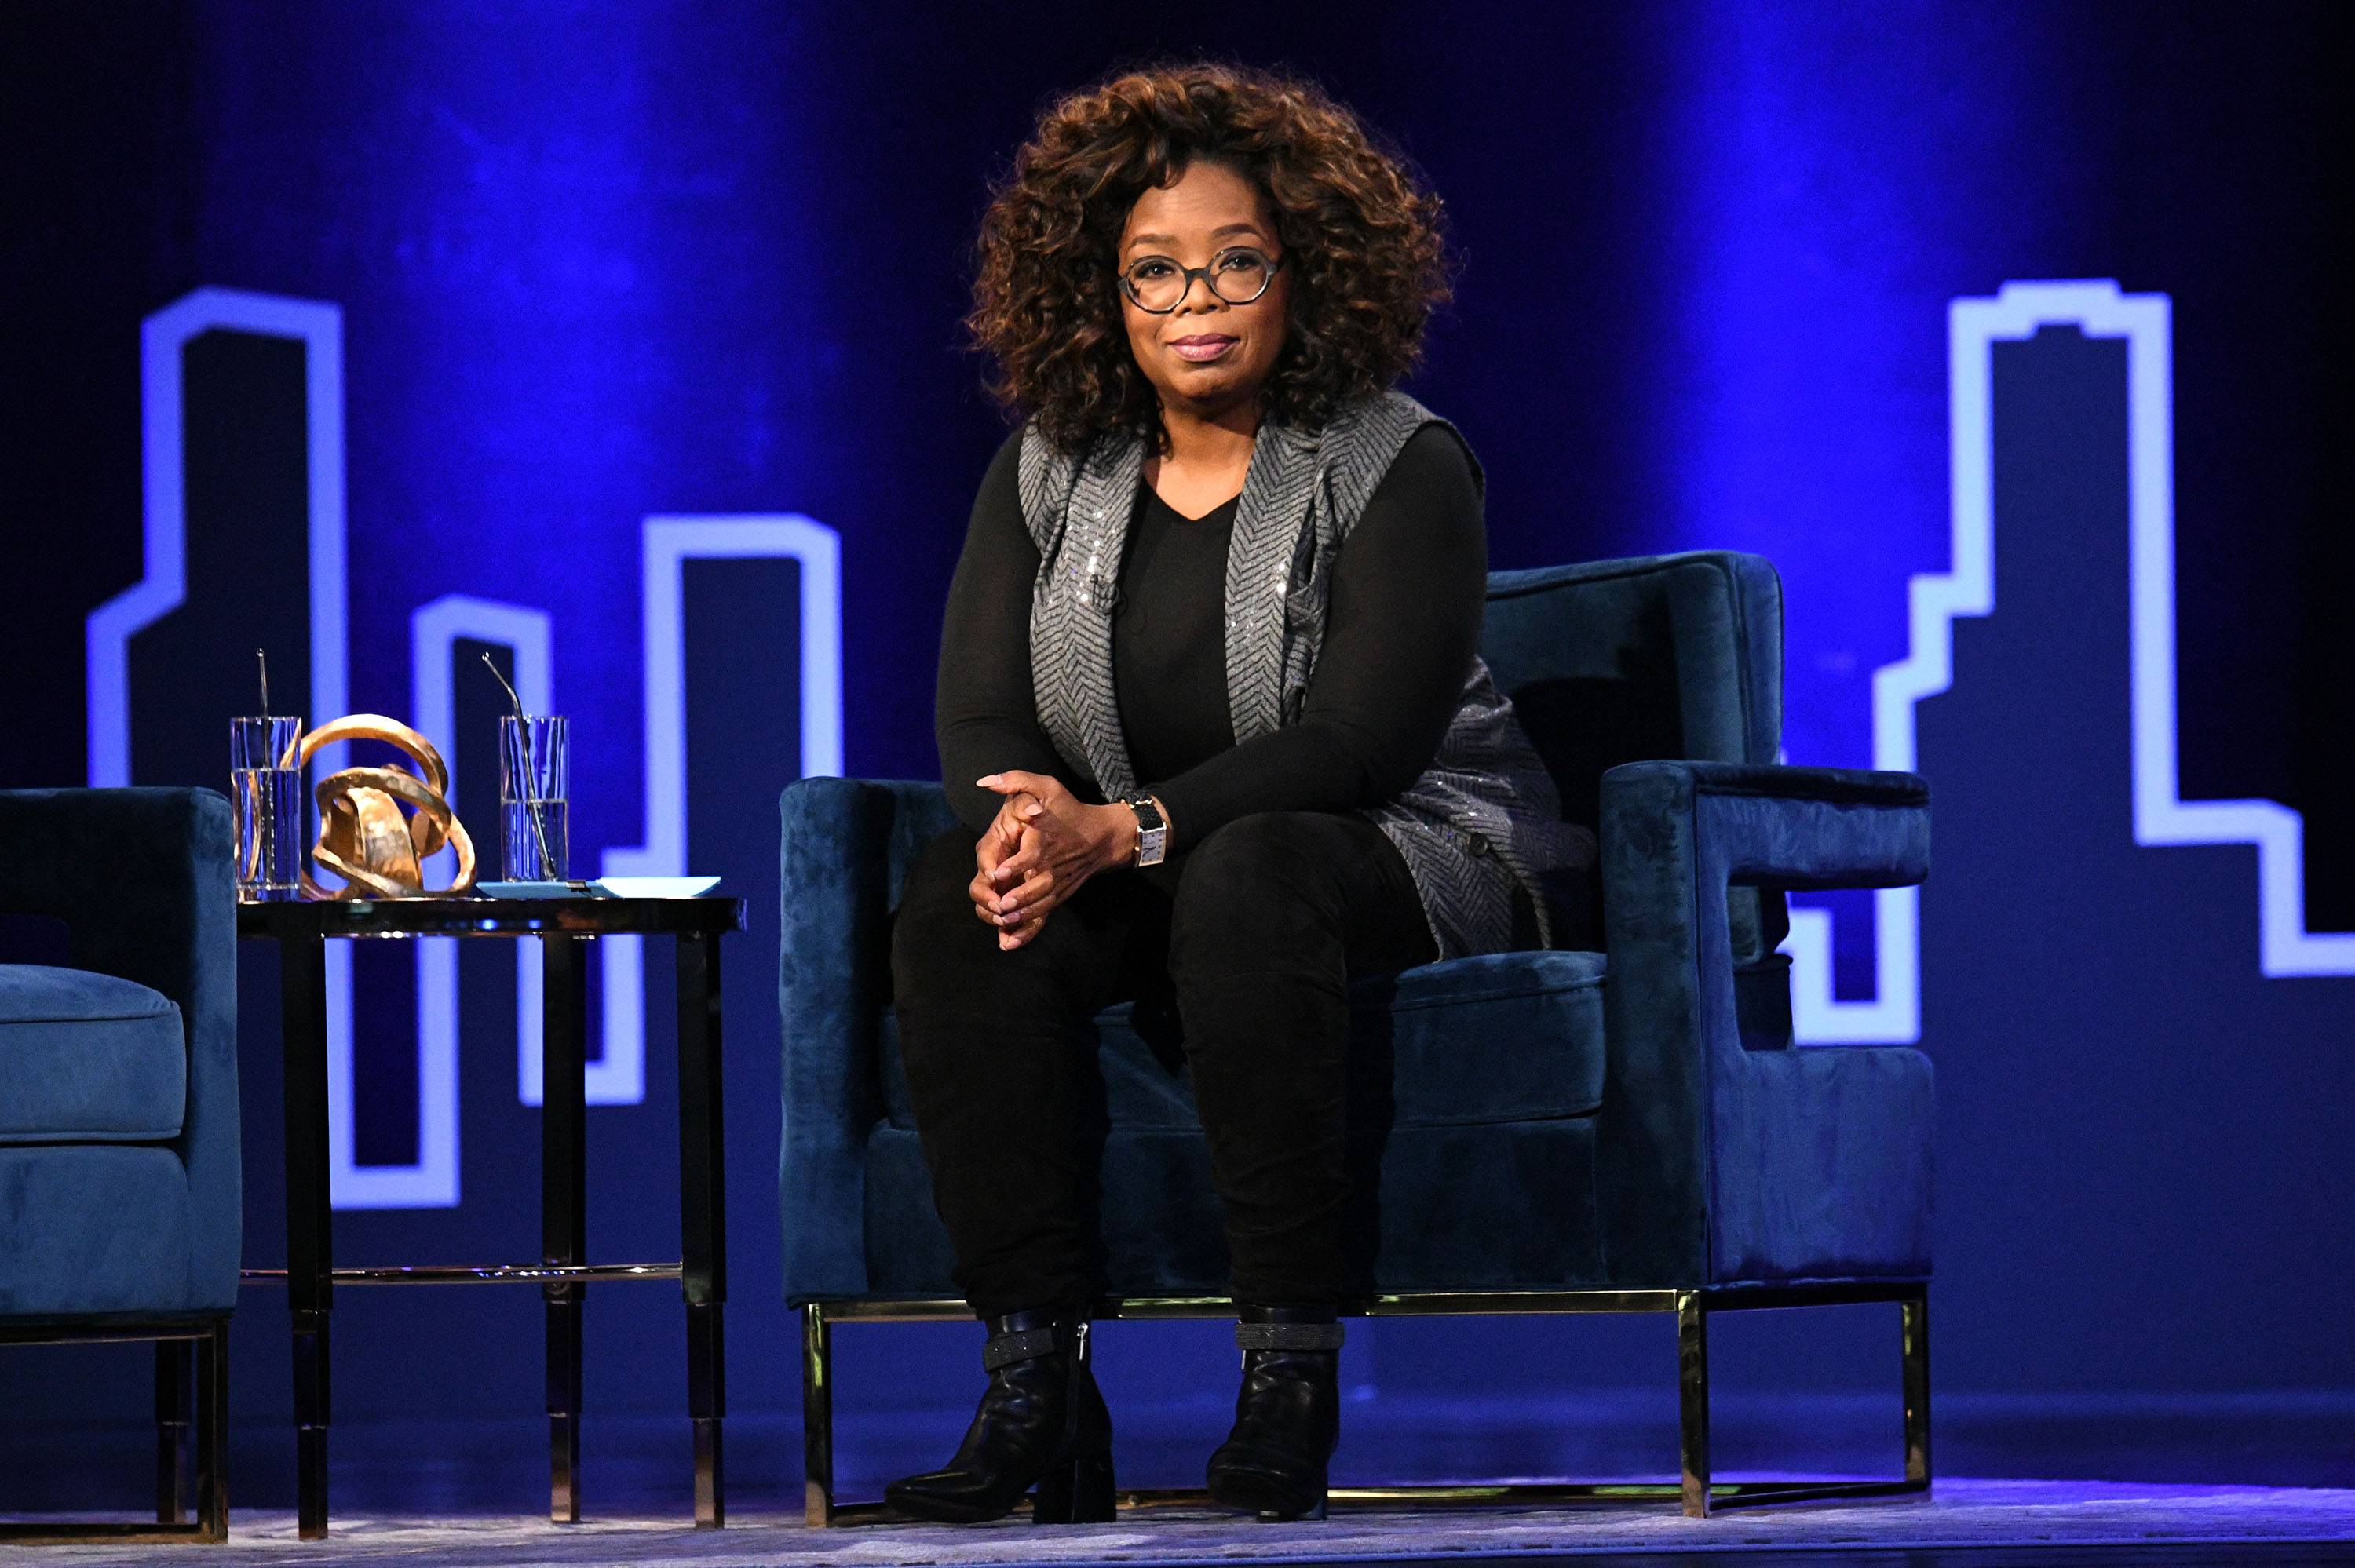 NEW YORK, NEW YORK - FEBRUARY 05: Oprah Winfrey speaks onstage during Oprah's SuperSoul Conversations at PlayStation Theater on February 05, 2019 in New York City. (Photo by Bryan Bedder/Getty Images for THR)